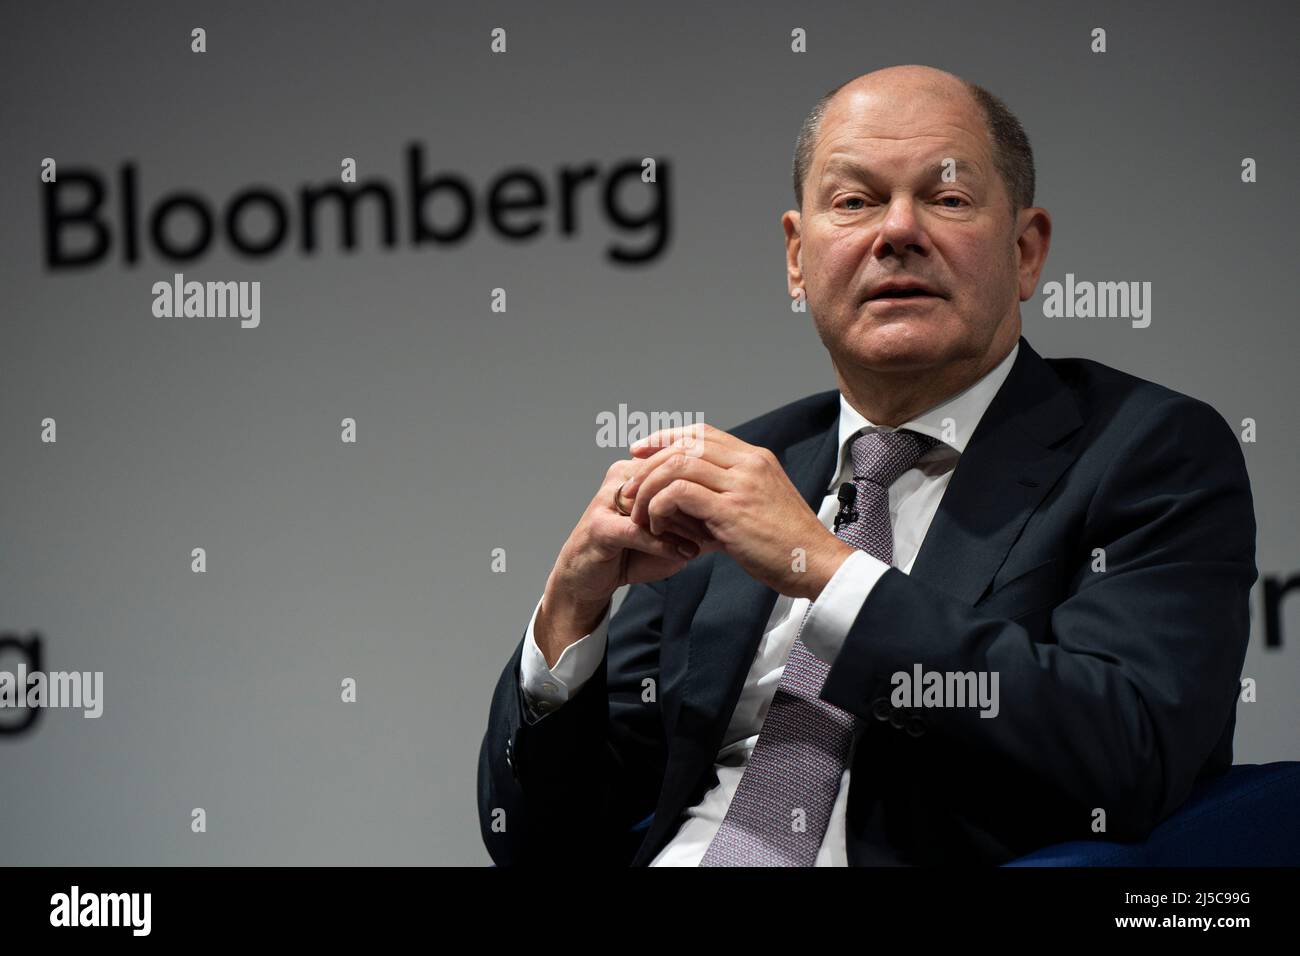 German Chancellor Olaf Scholz in London, February 2019  Photo by David Levenson/Alamy Stock Photo